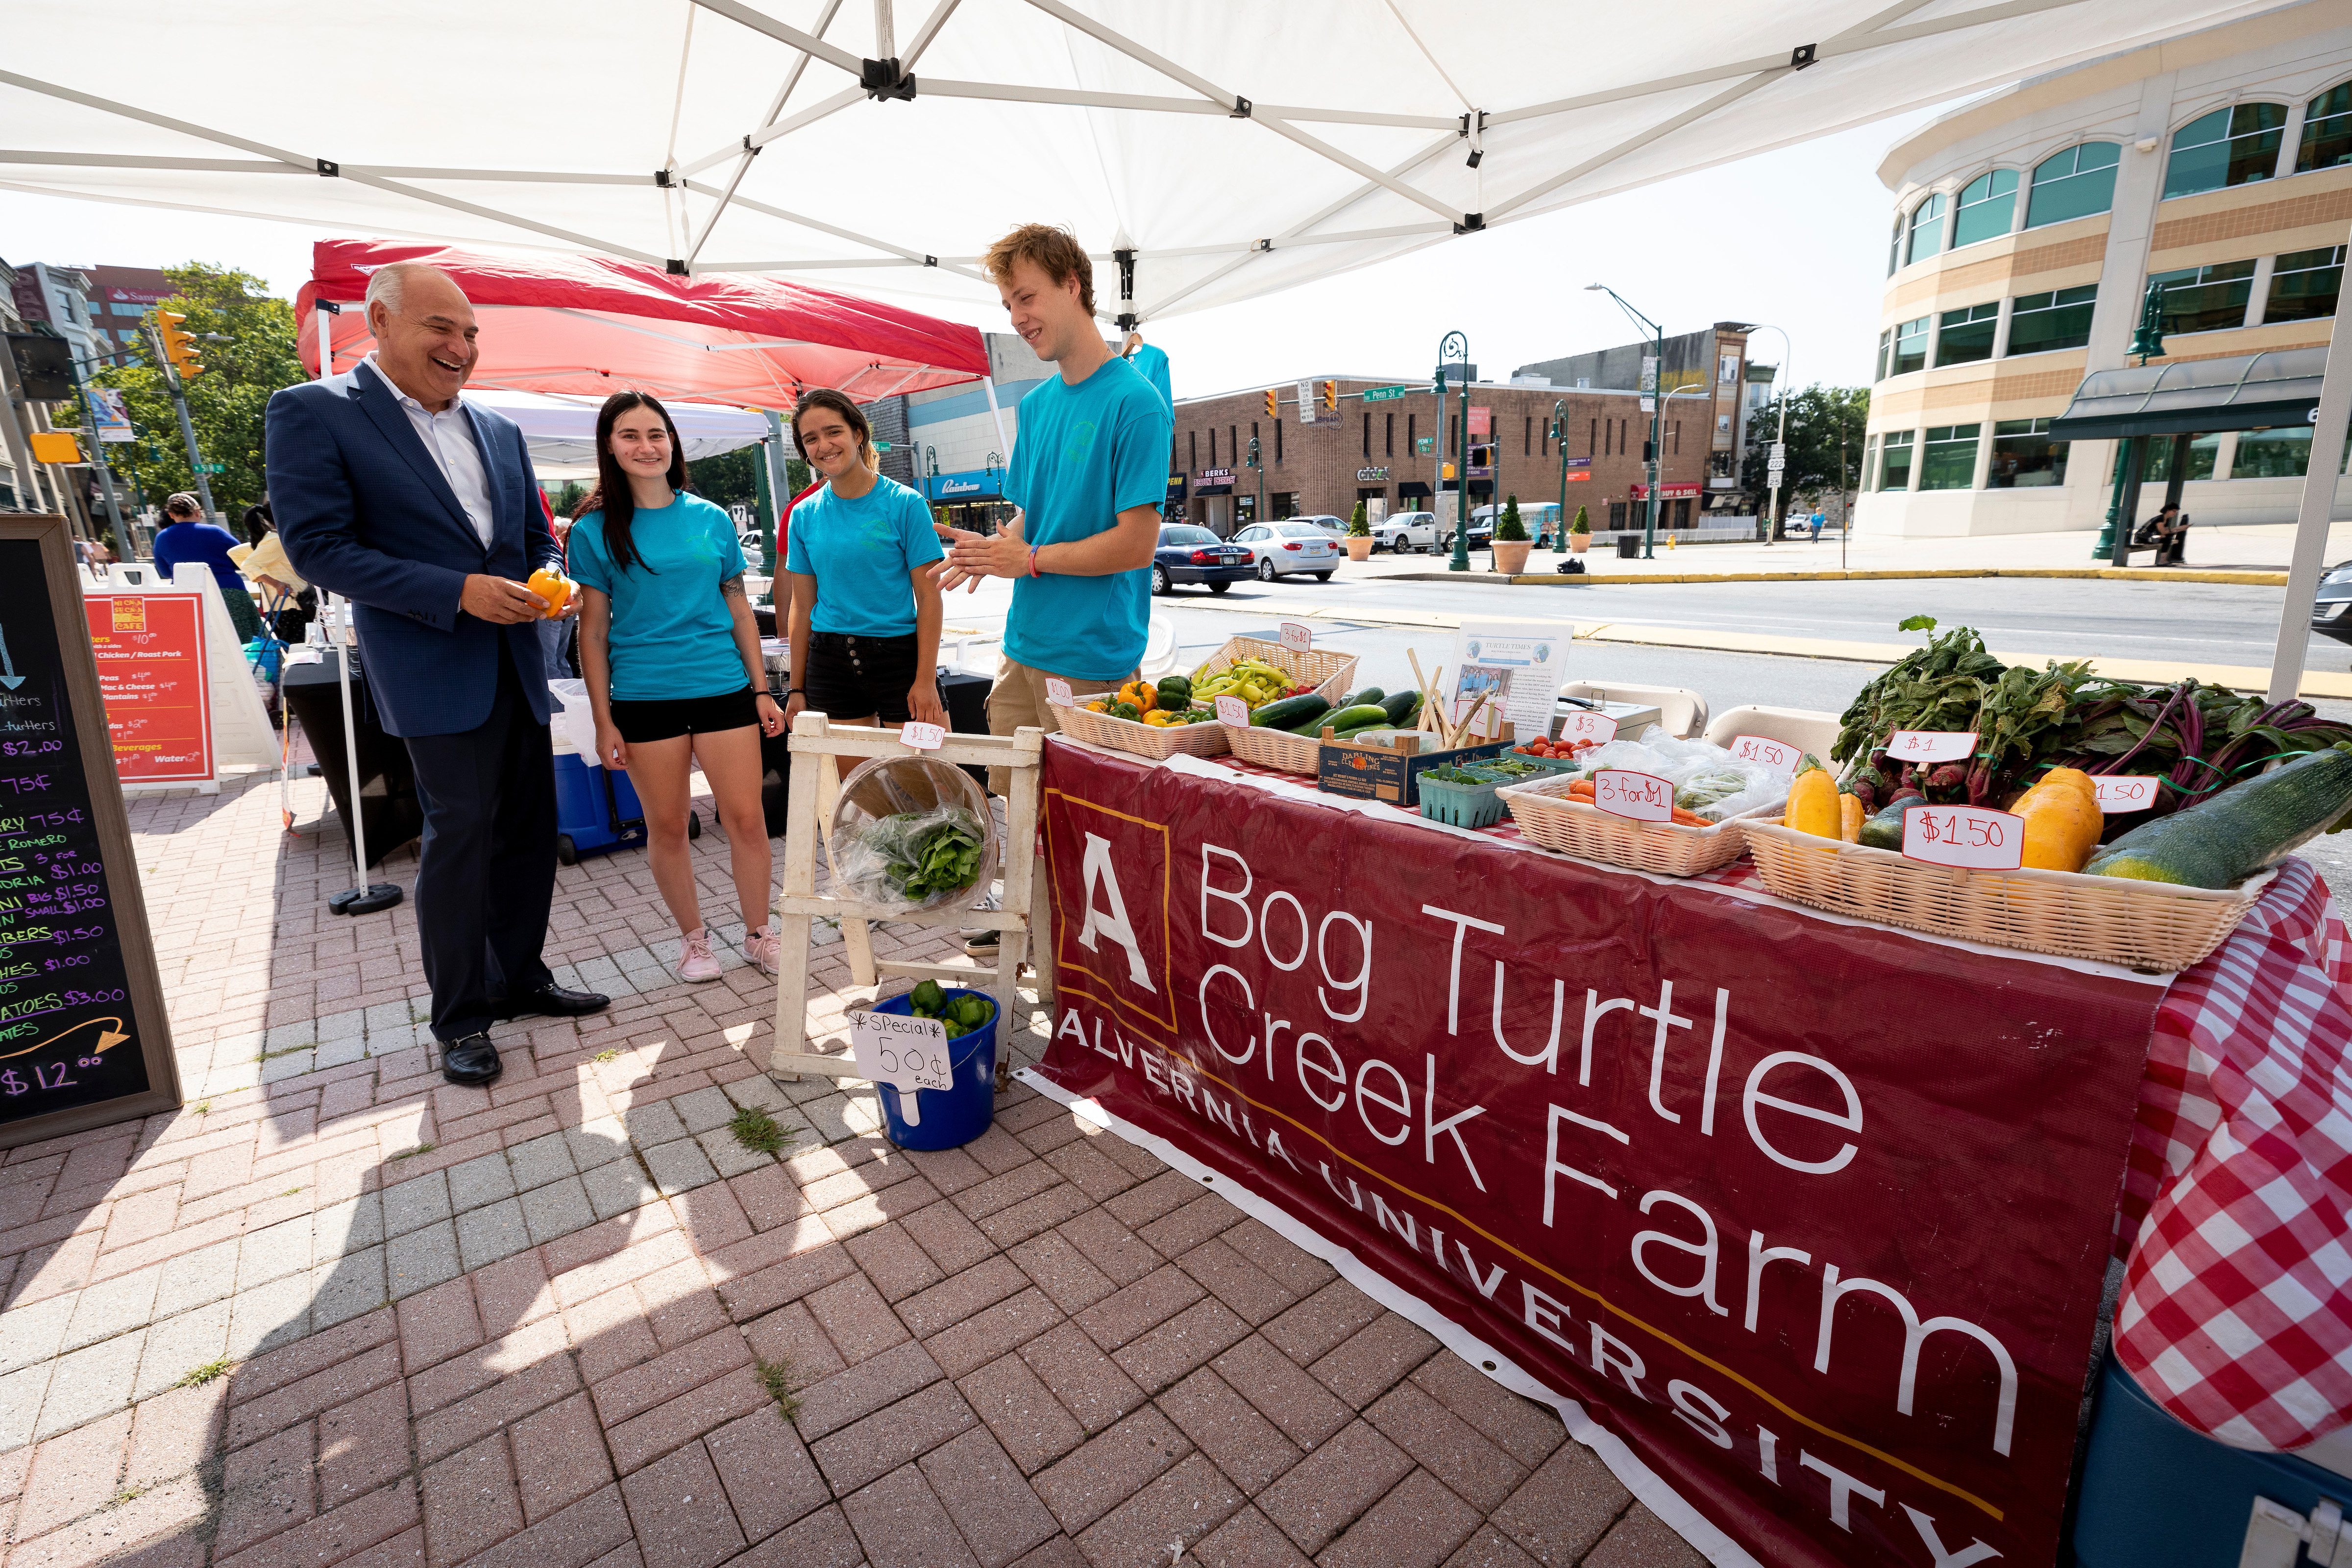 John Loyack and students from Bog Turtle Creek Farm in Downtown Reading.